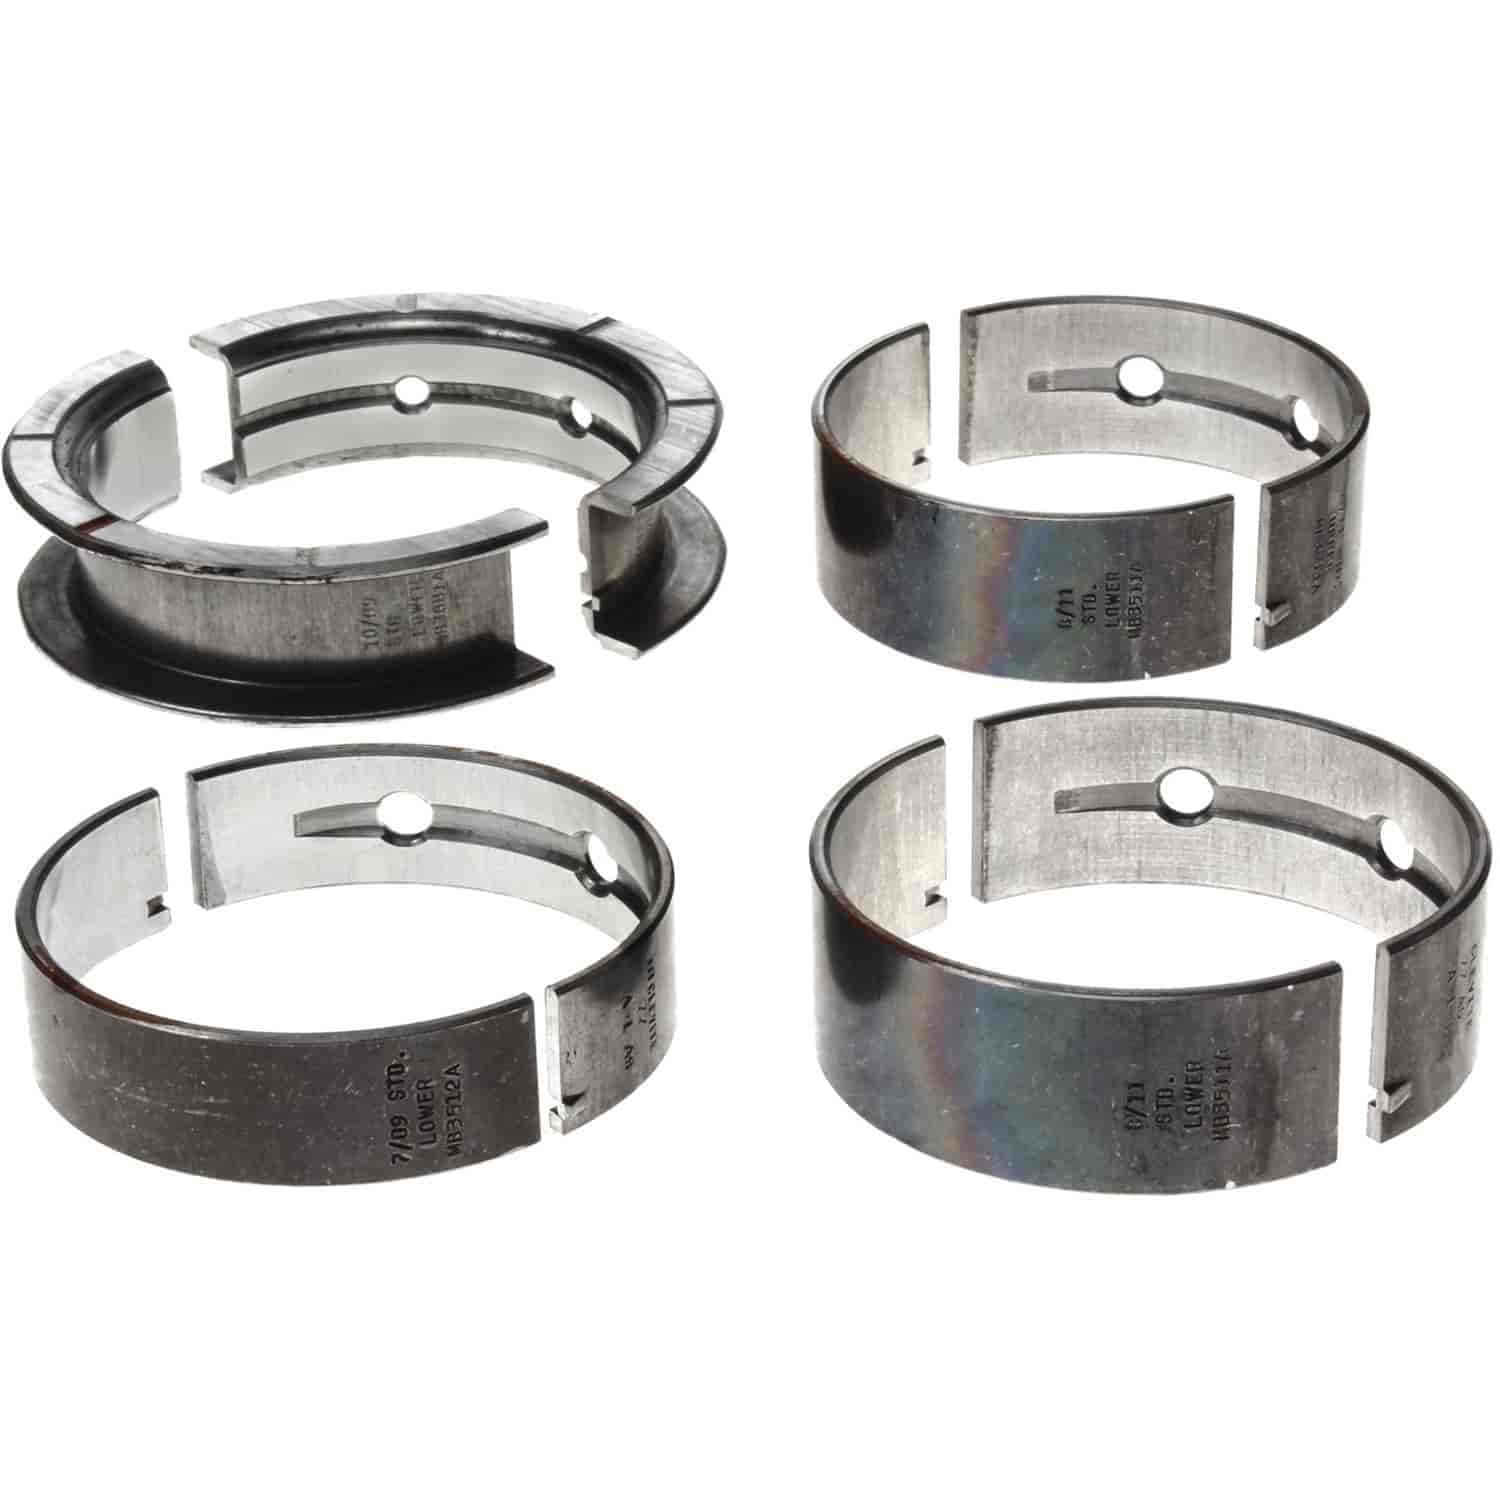 Main Bearing Set Chevy 1985-2009 V6 2.8/3.1/3.4L with -.50mm Undersize